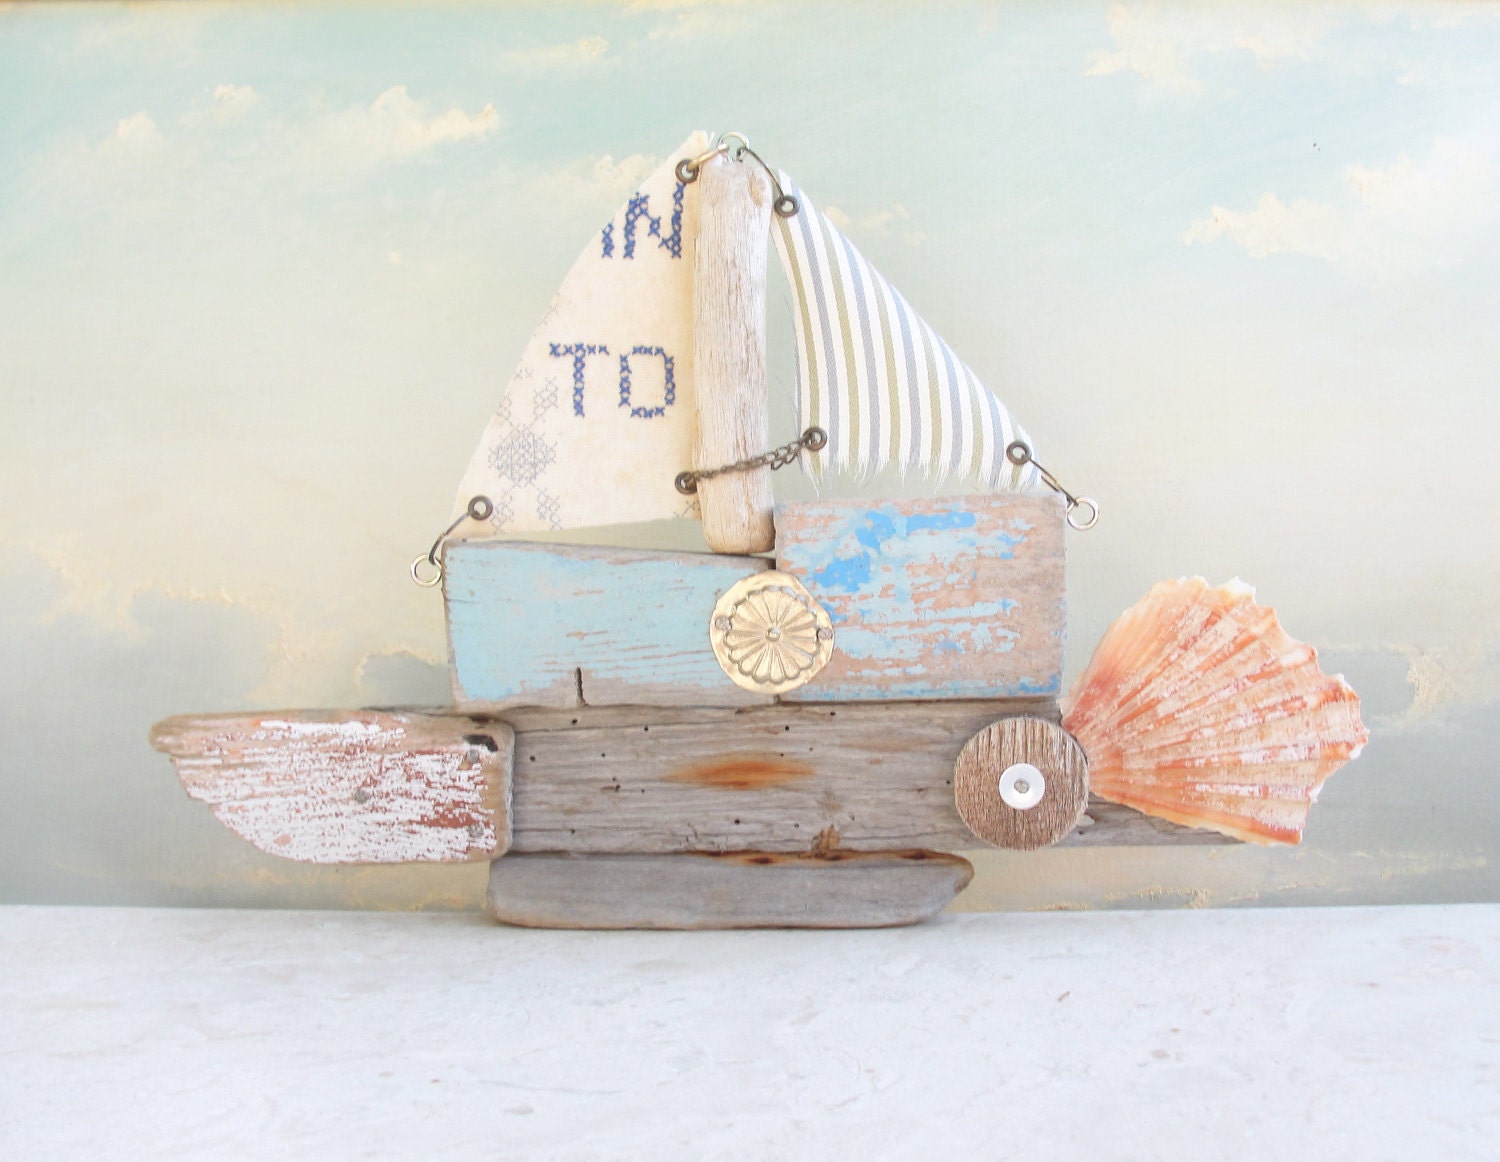 Where are You Going To - Driftwood Boat